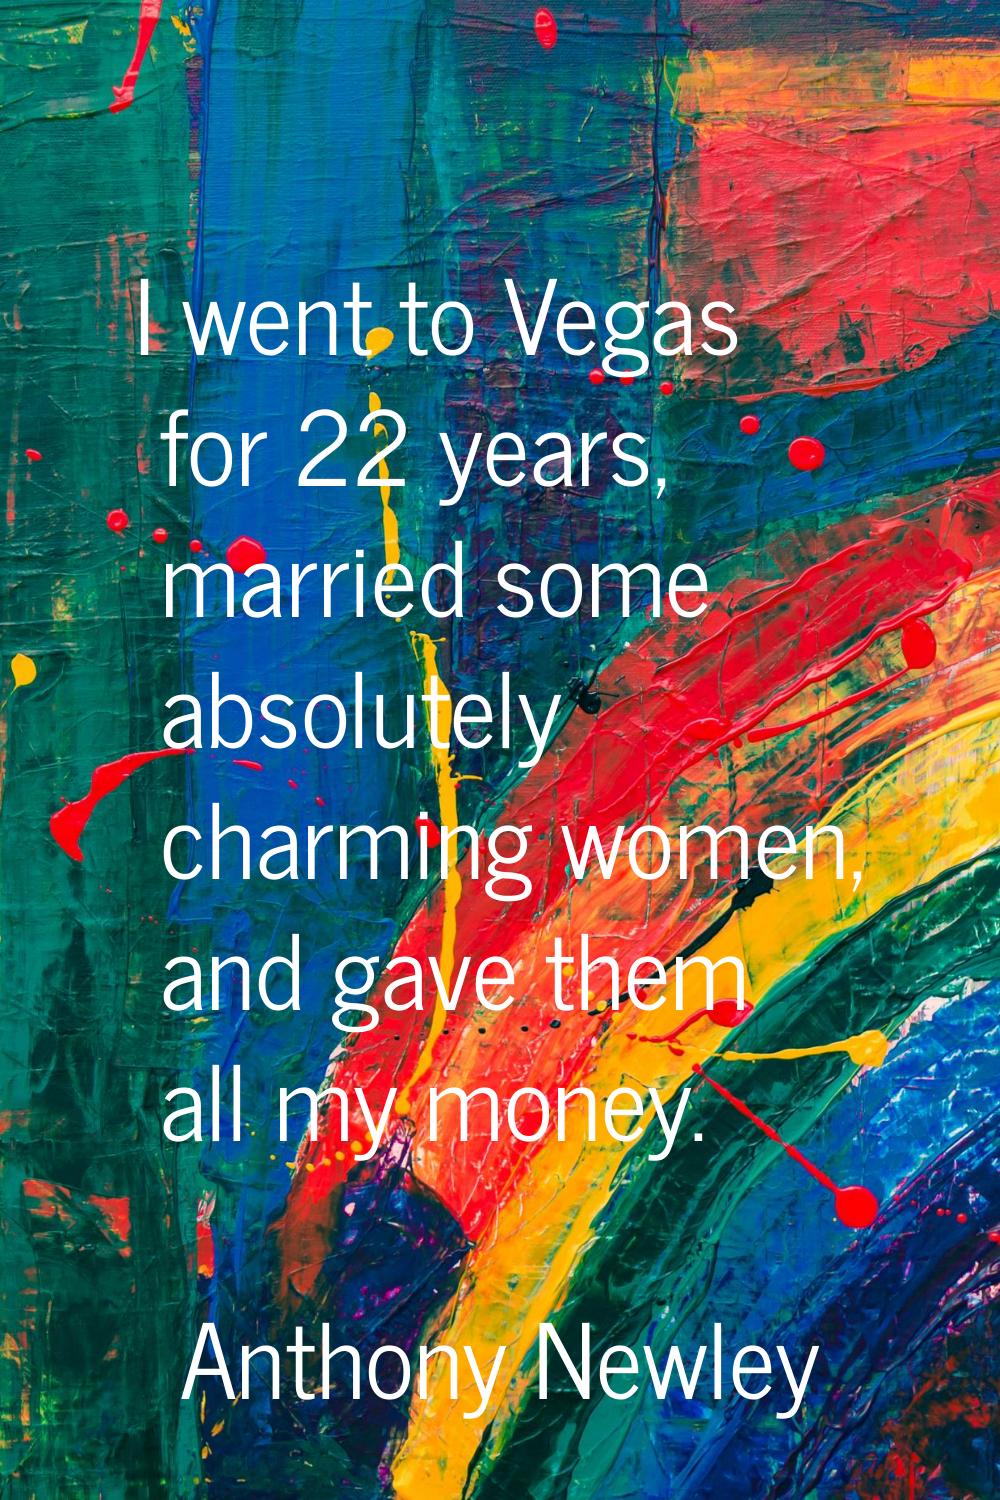 I went to Vegas for 22 years, married some absolutely charming women, and gave them all my money.